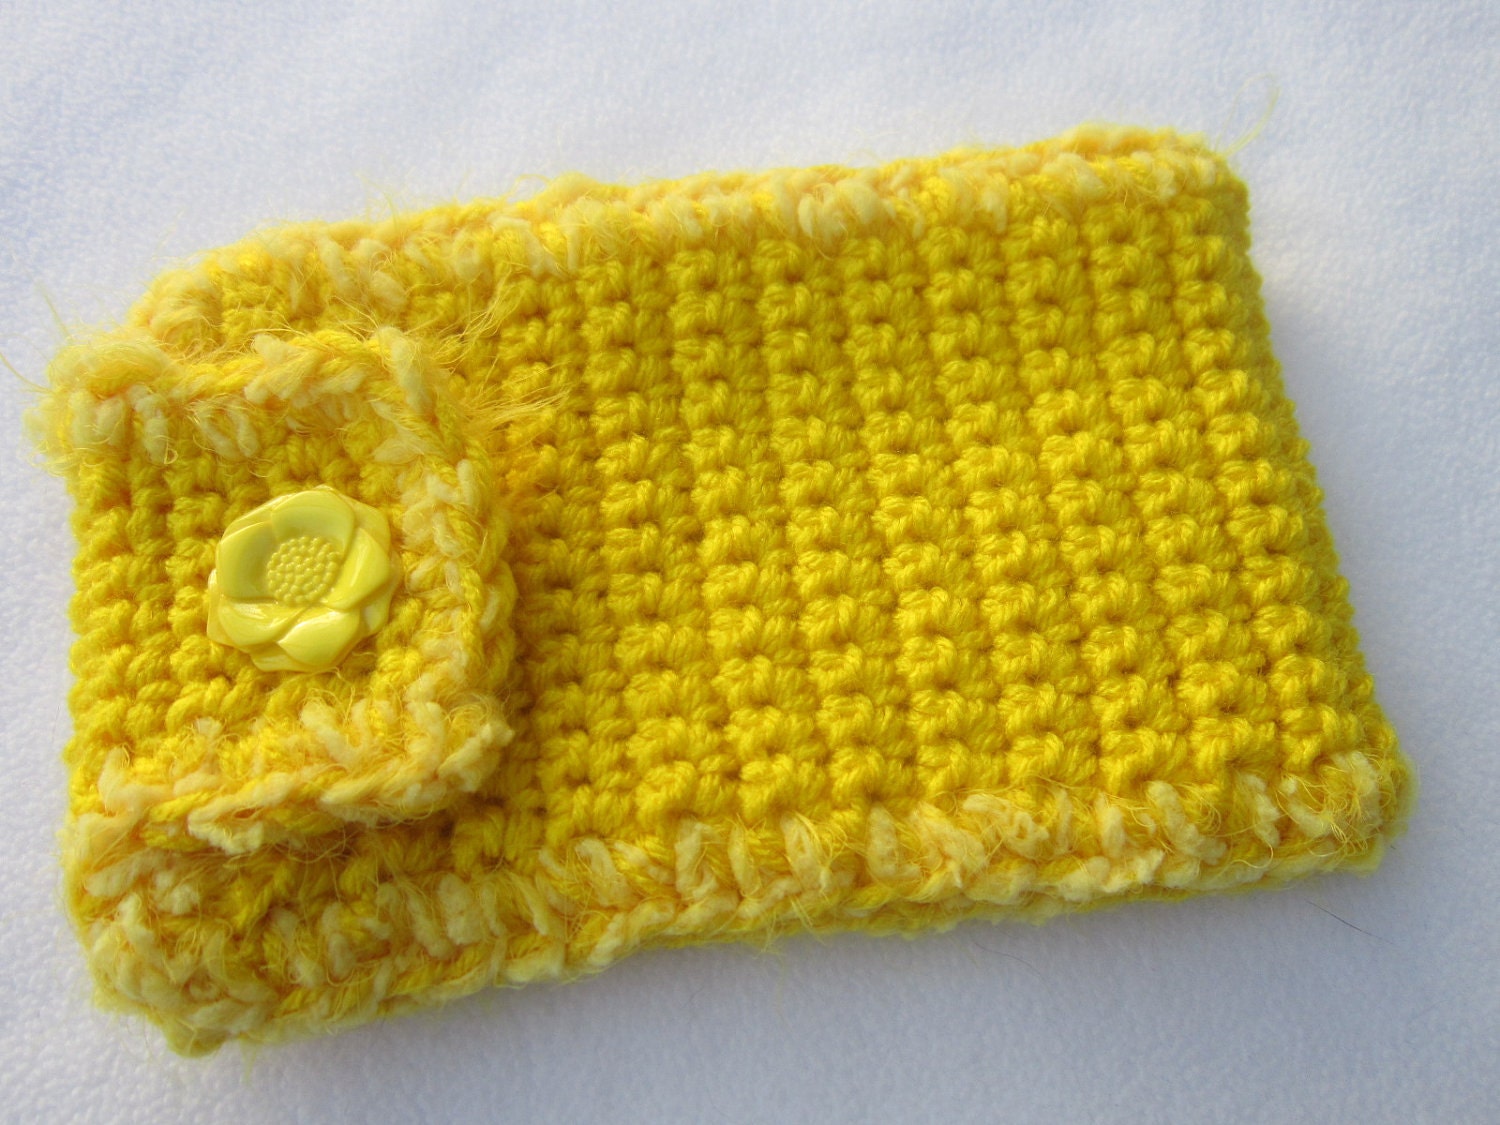 Crocheted Sunglass or Glasses Case - Bright Yellow